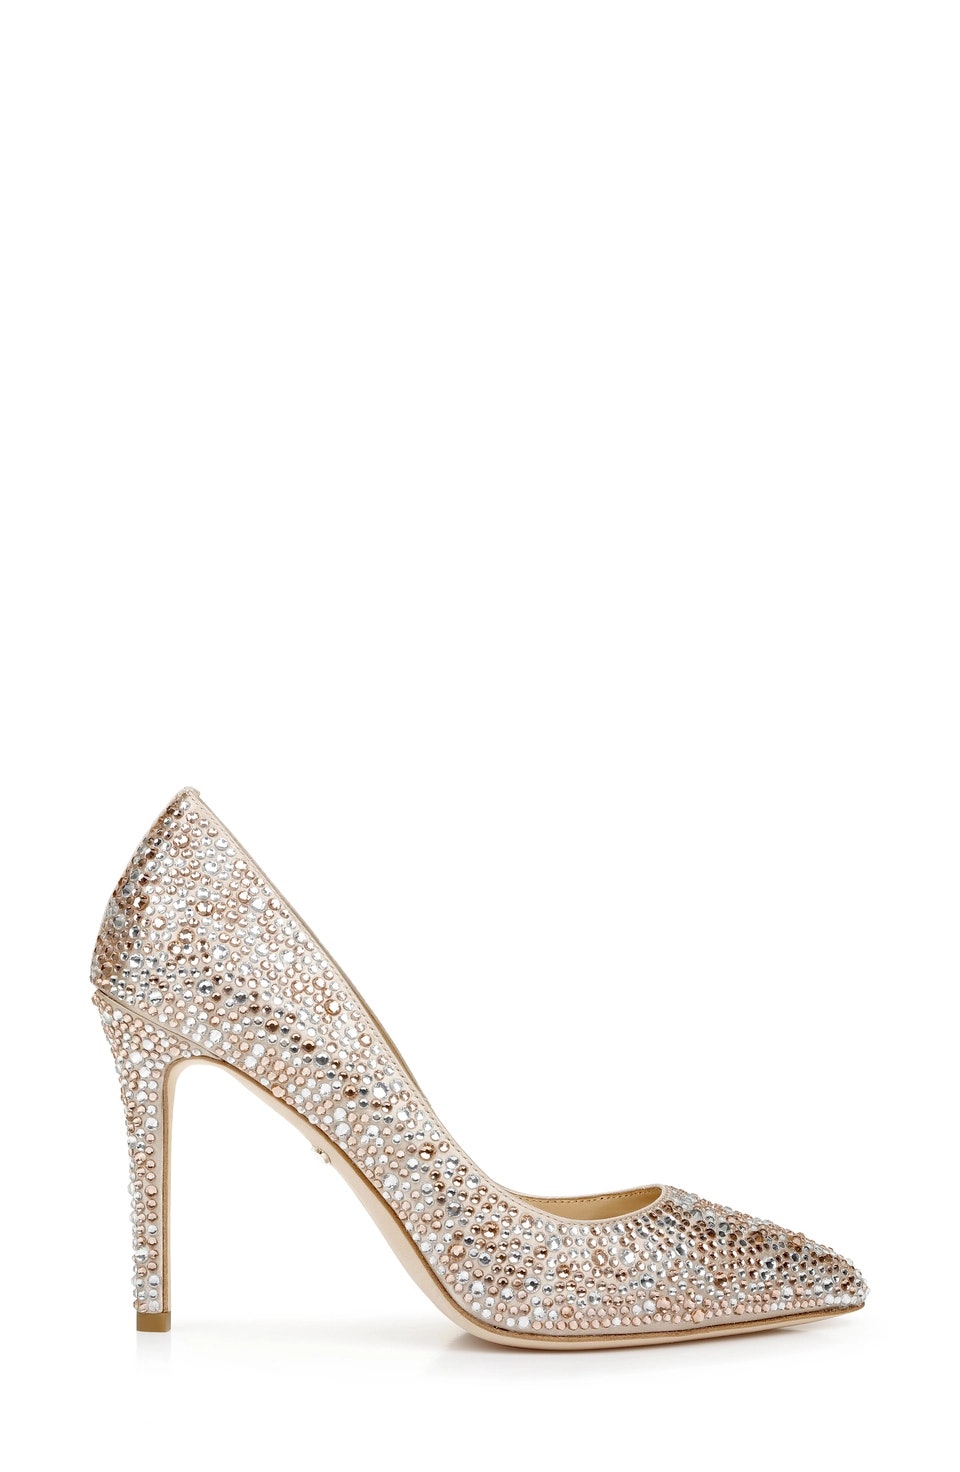 Wedding shoes with glitter and heels 